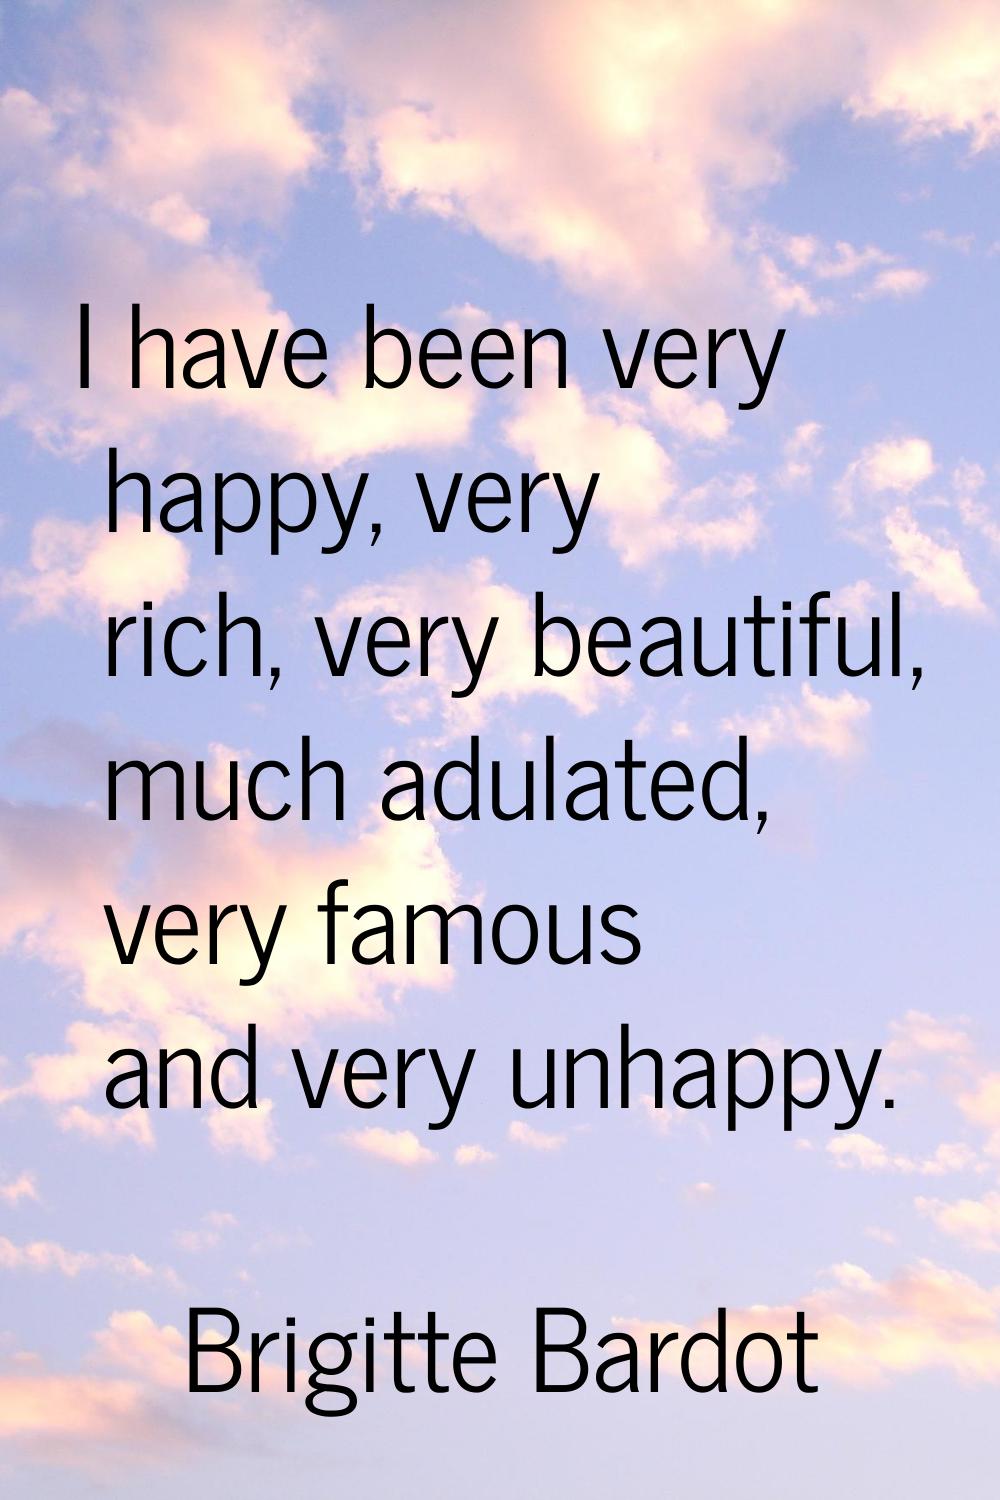 I have been very happy, very rich, very beautiful, much adulated, very famous and very unhappy.